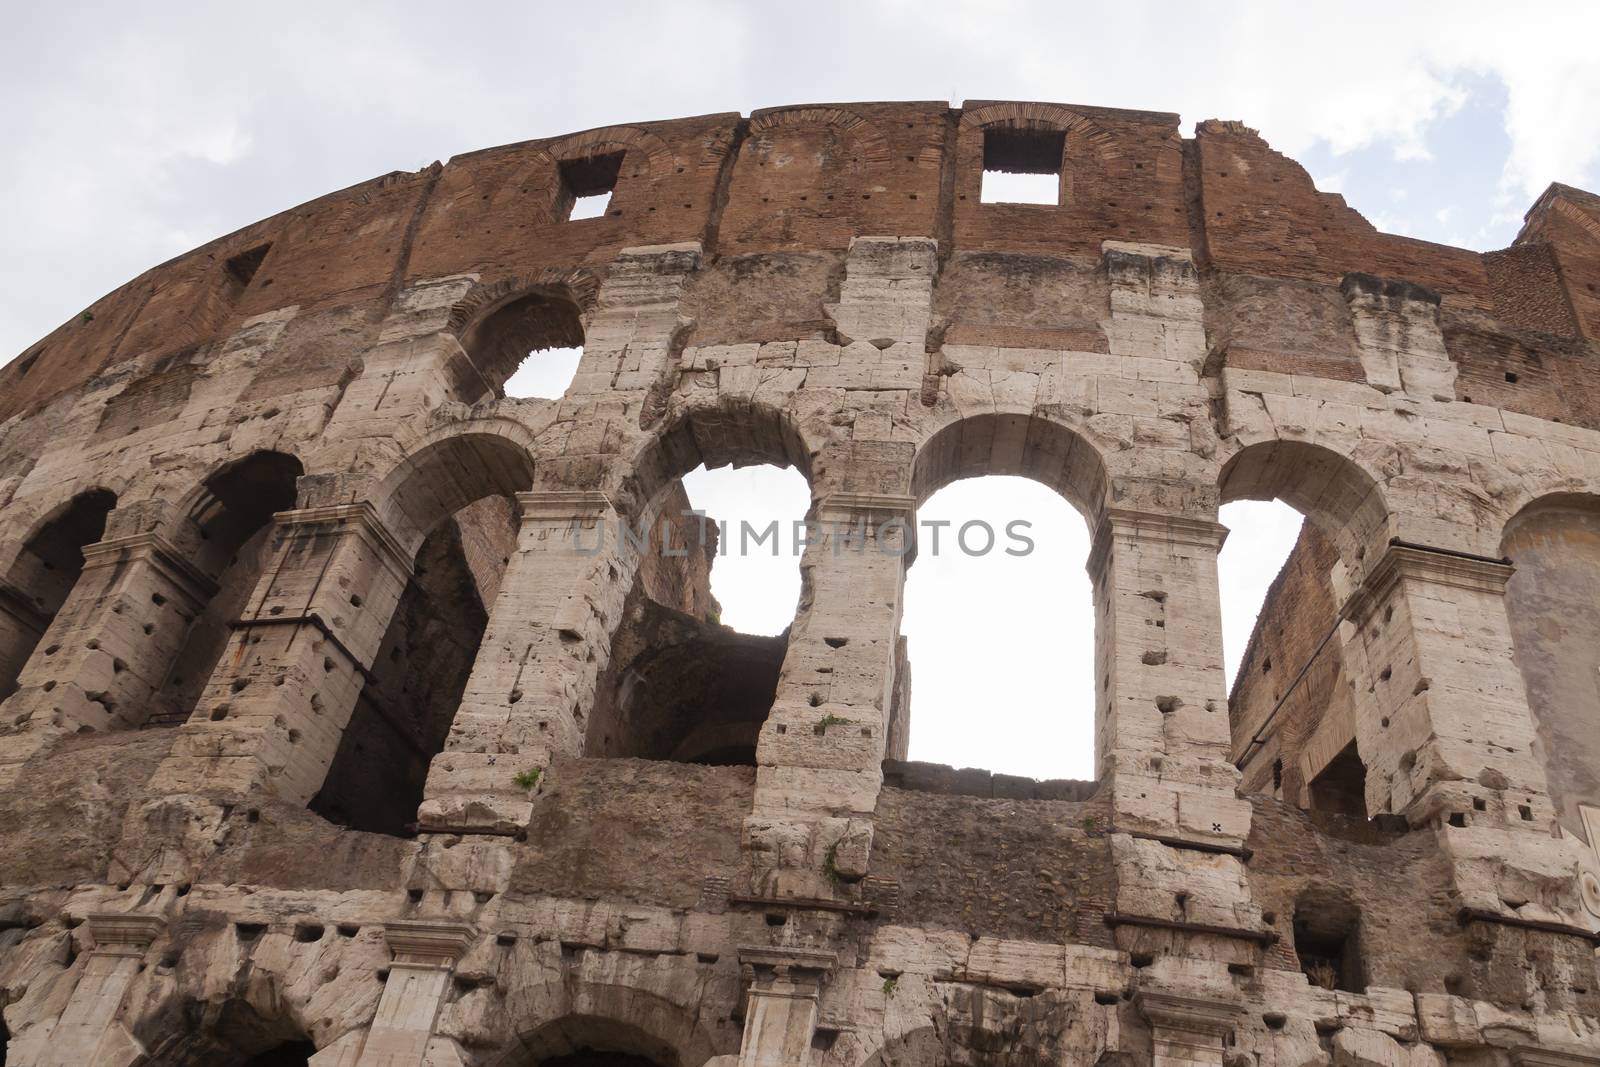 Rome, Italy - June 27, 2010: Detailed view of the exterior arches of the Colosseum, Rome.